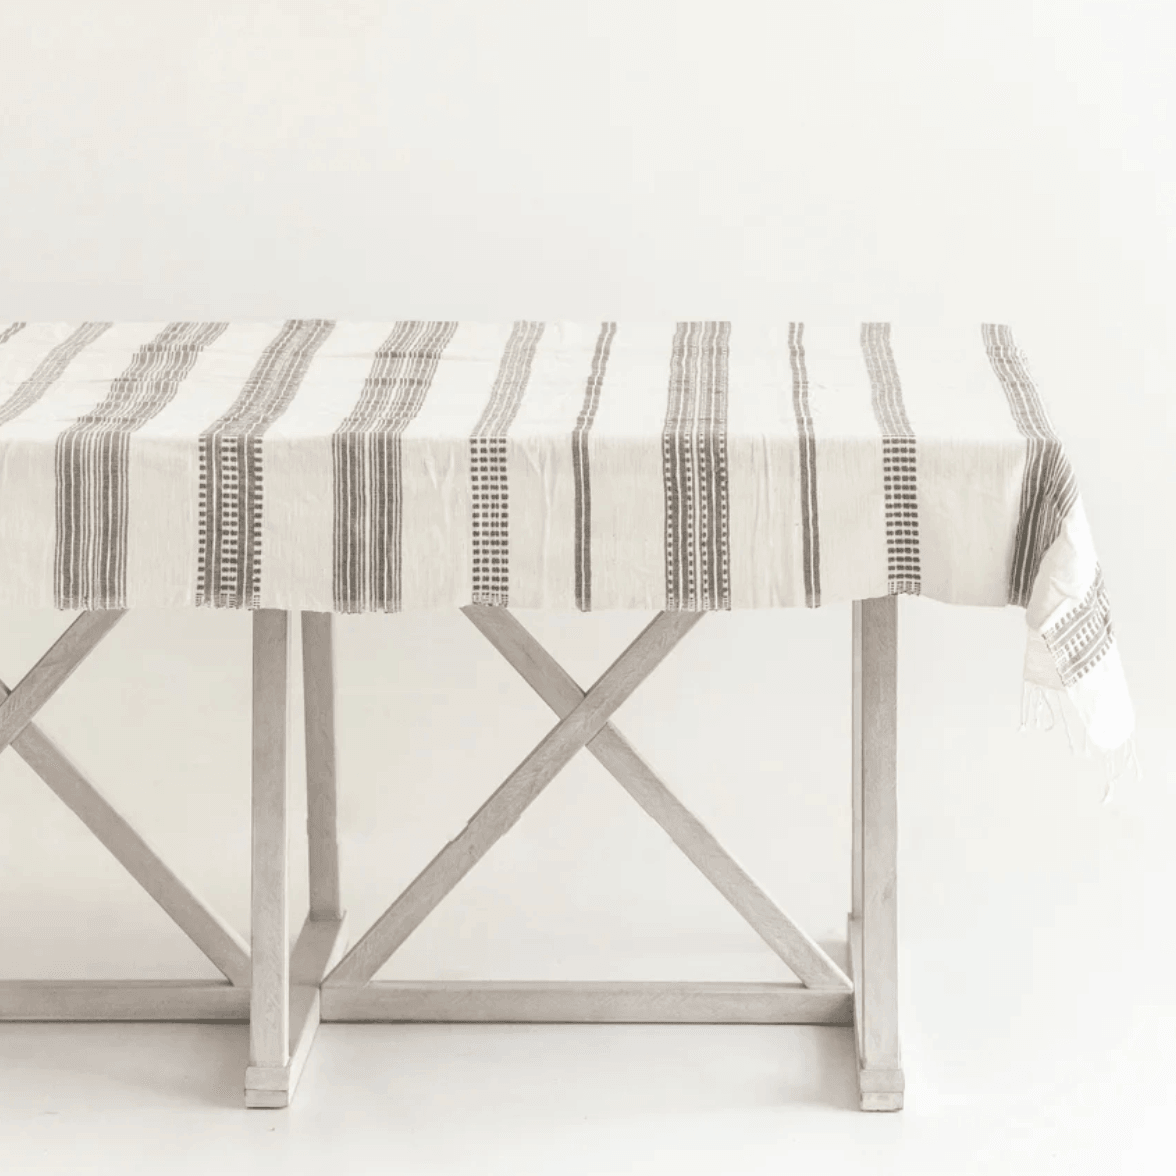 ethically sourced Aden Cotton Tablecloth 96x54 Life In Alignment